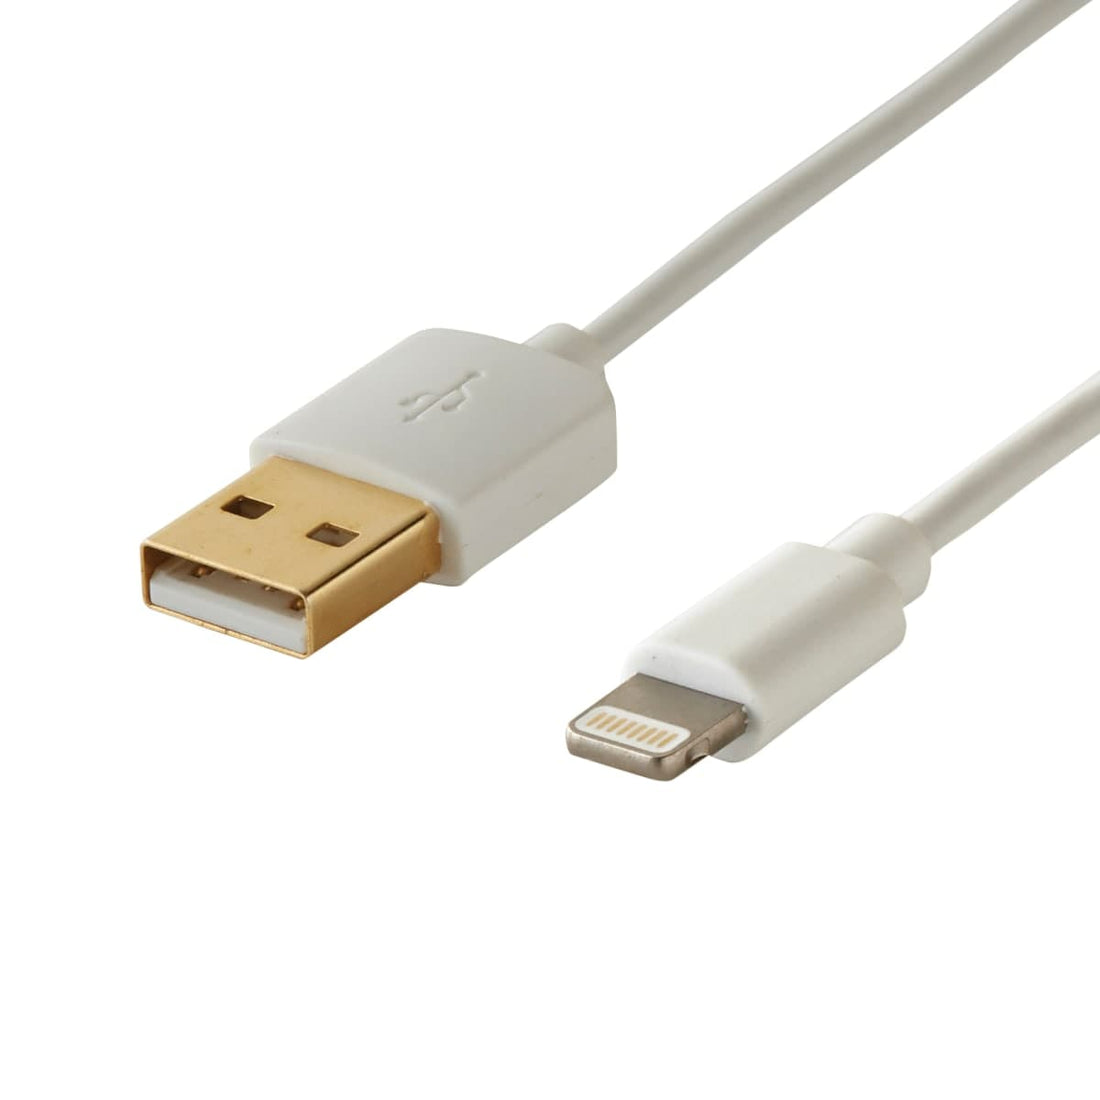 APPLE CABLE 0.2MT LIGHTNING TYPE/A TYPEUSB - best price from Maltashopper.com BR420005316